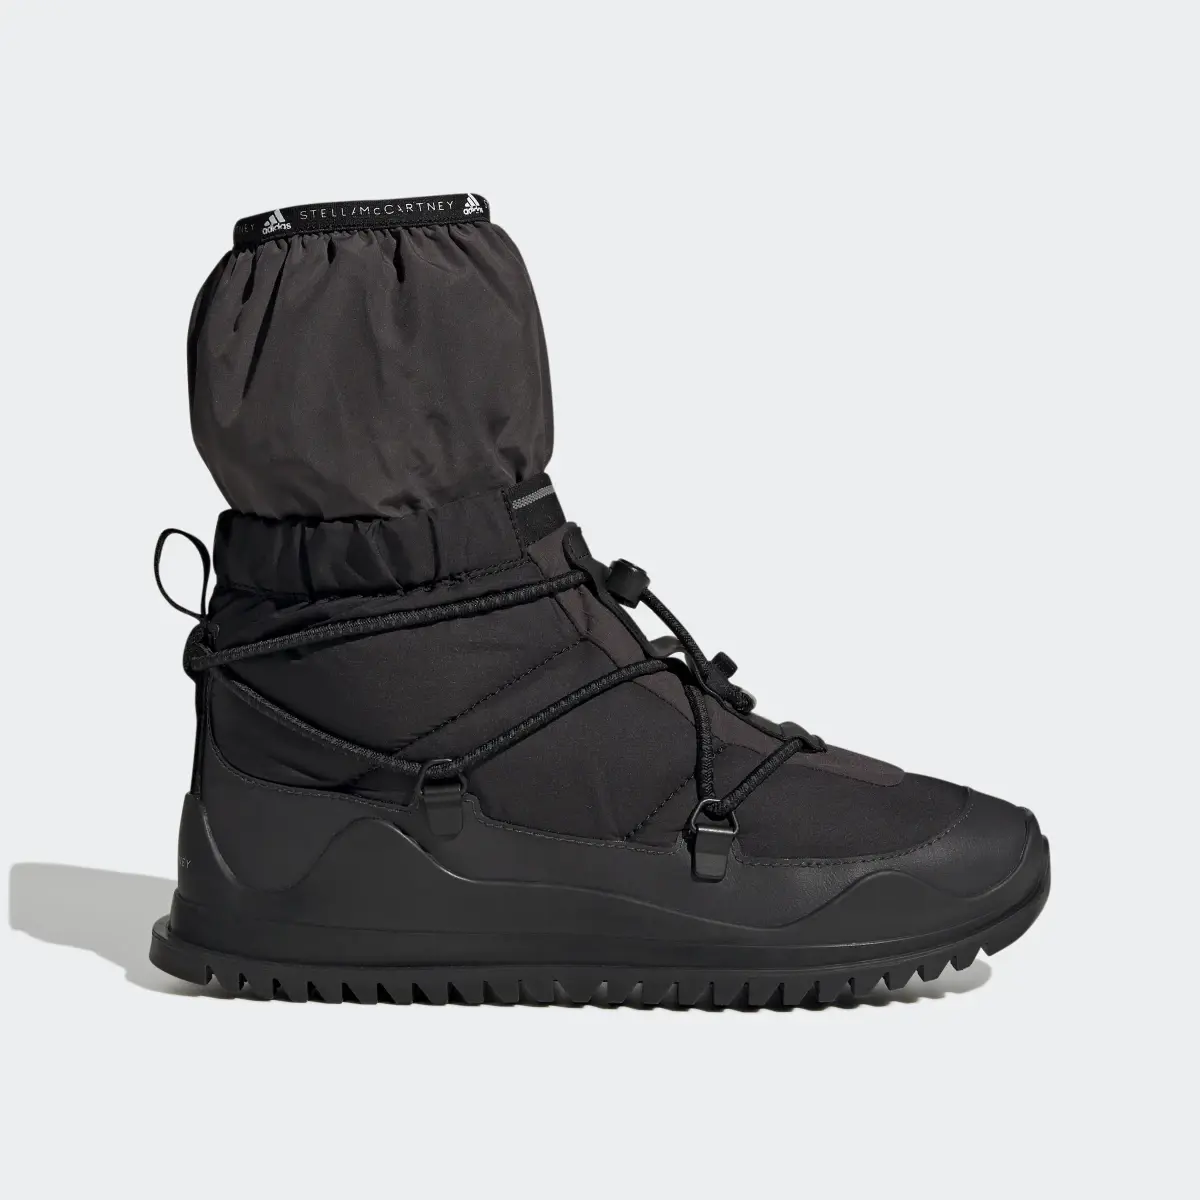 Adidas by Stella McCartney Winter COLD.RDY Boot. 2